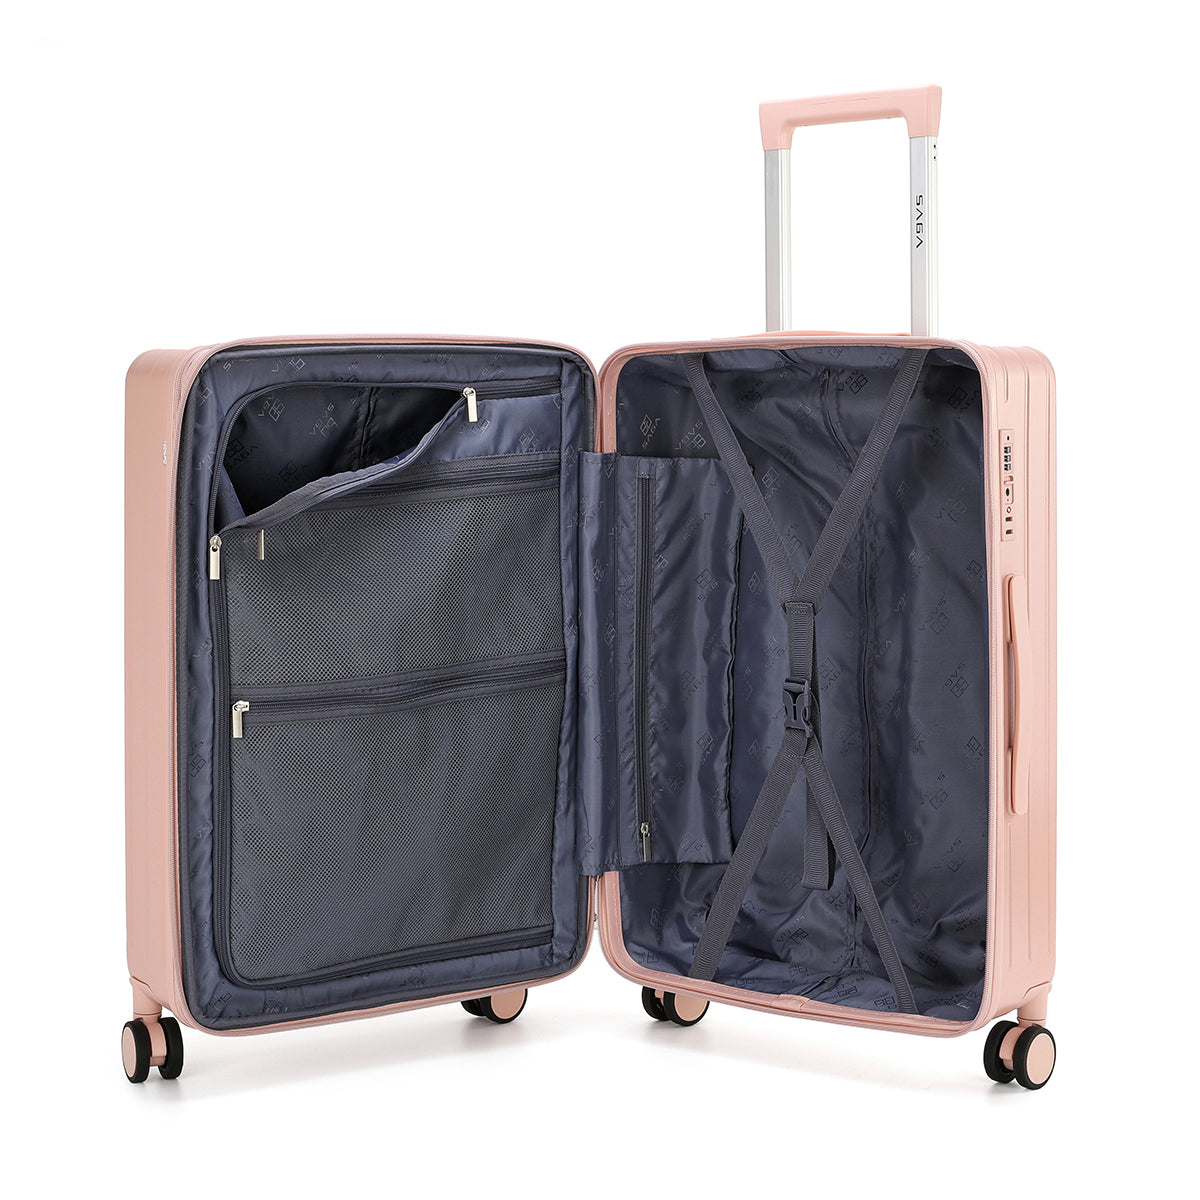 Luxurious polycarbonate pink travel bags, different sizes